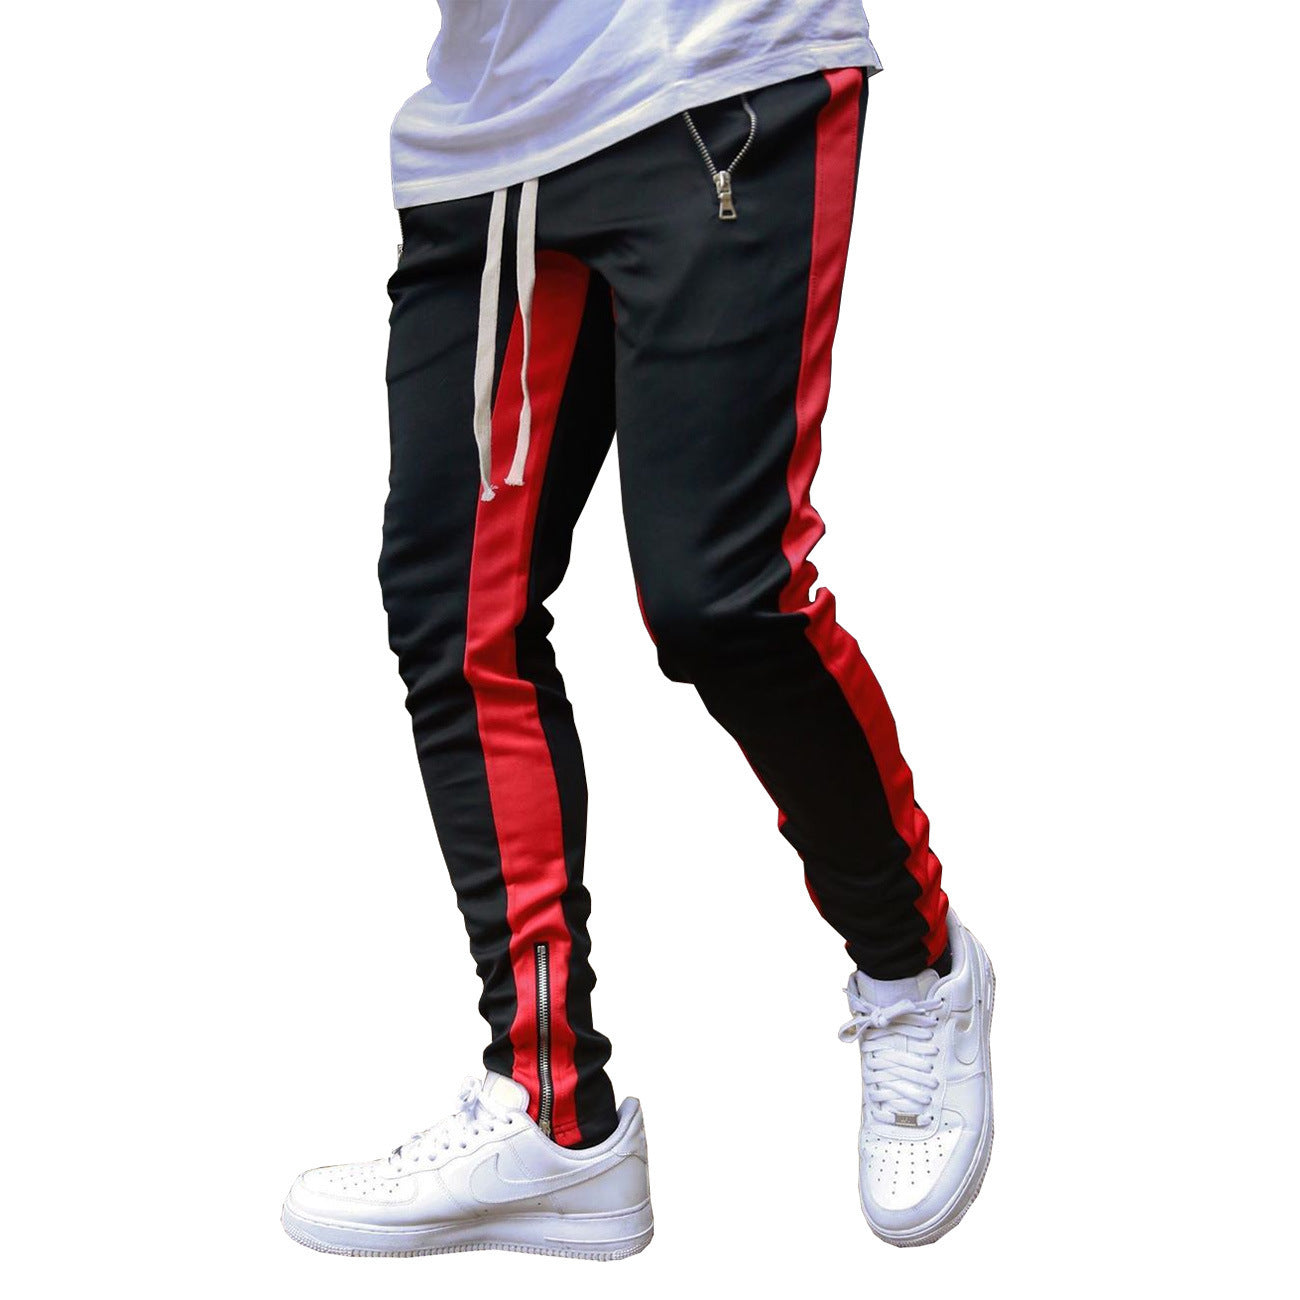 Men's Strappy Zippered Sports Trousers